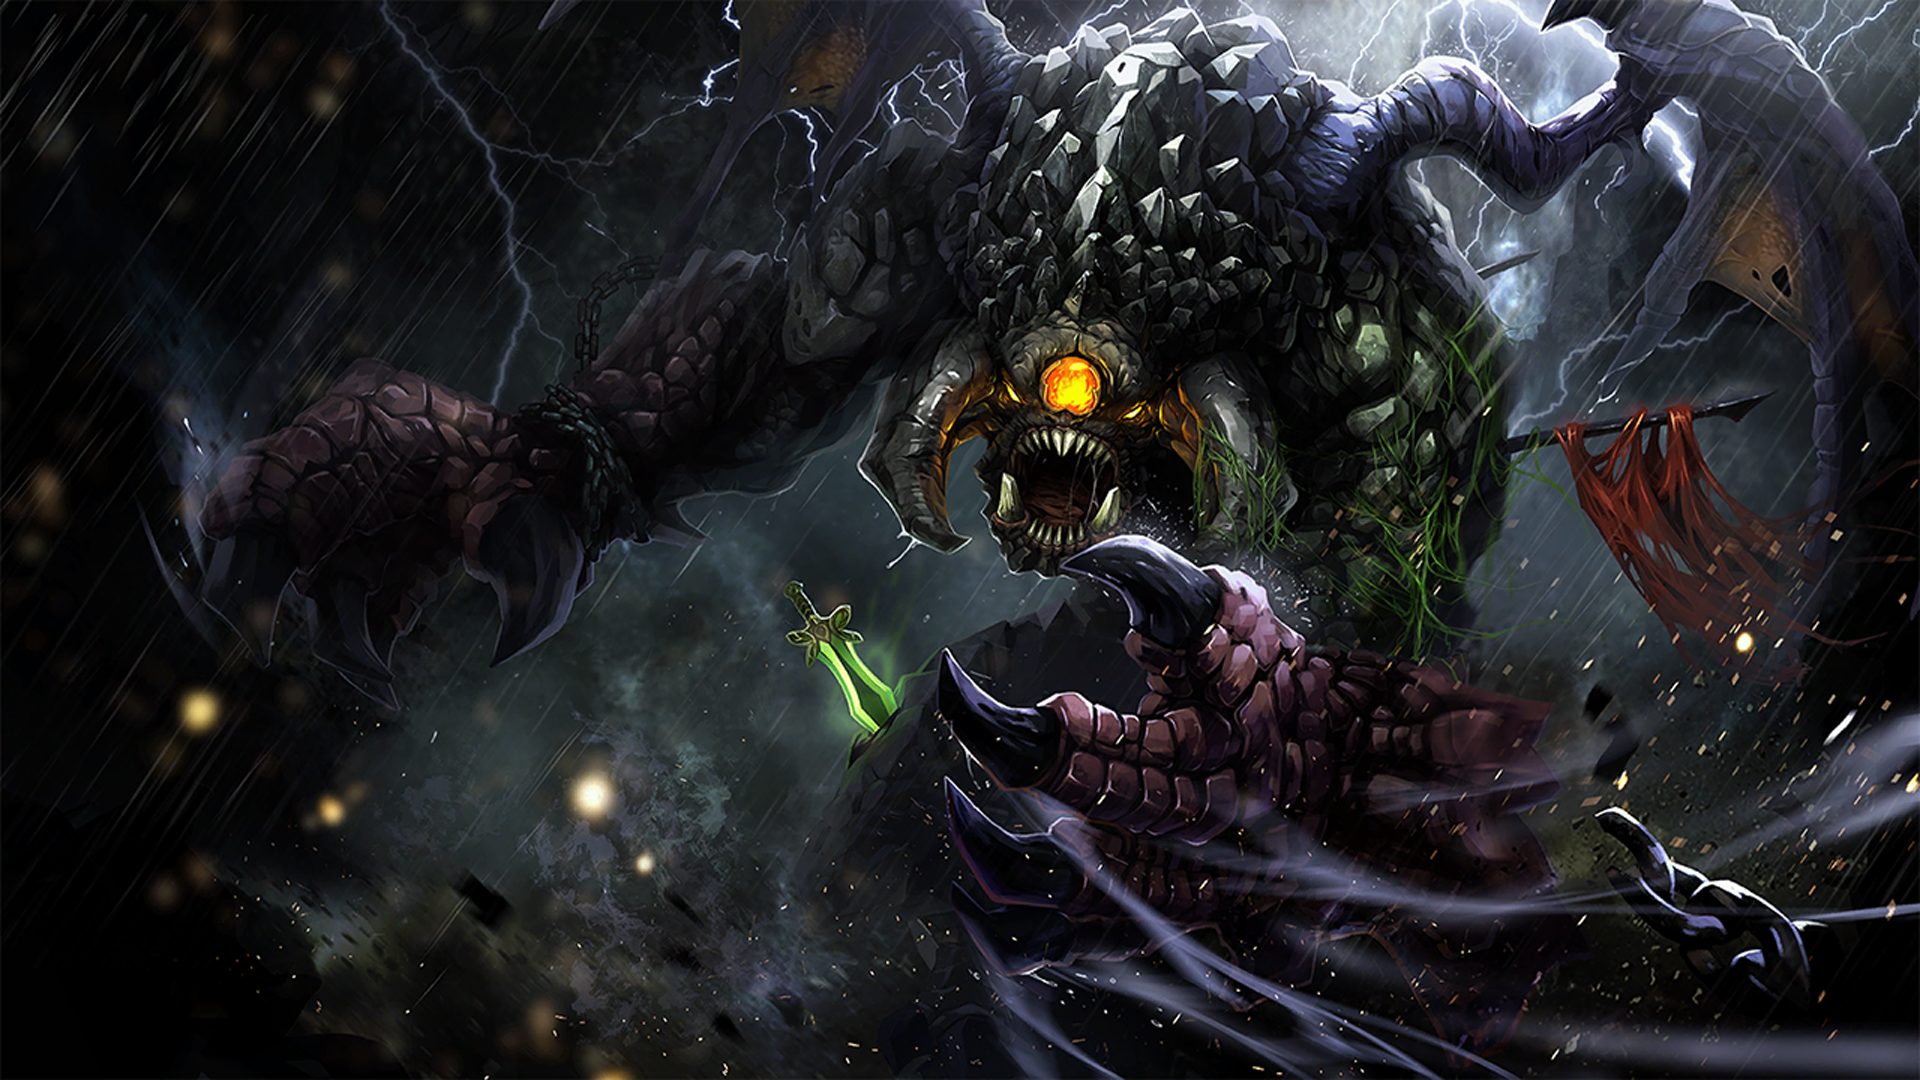 epic wallpapers 1920x1080 hd,cg artwork,demon,fictional character,pc game,games